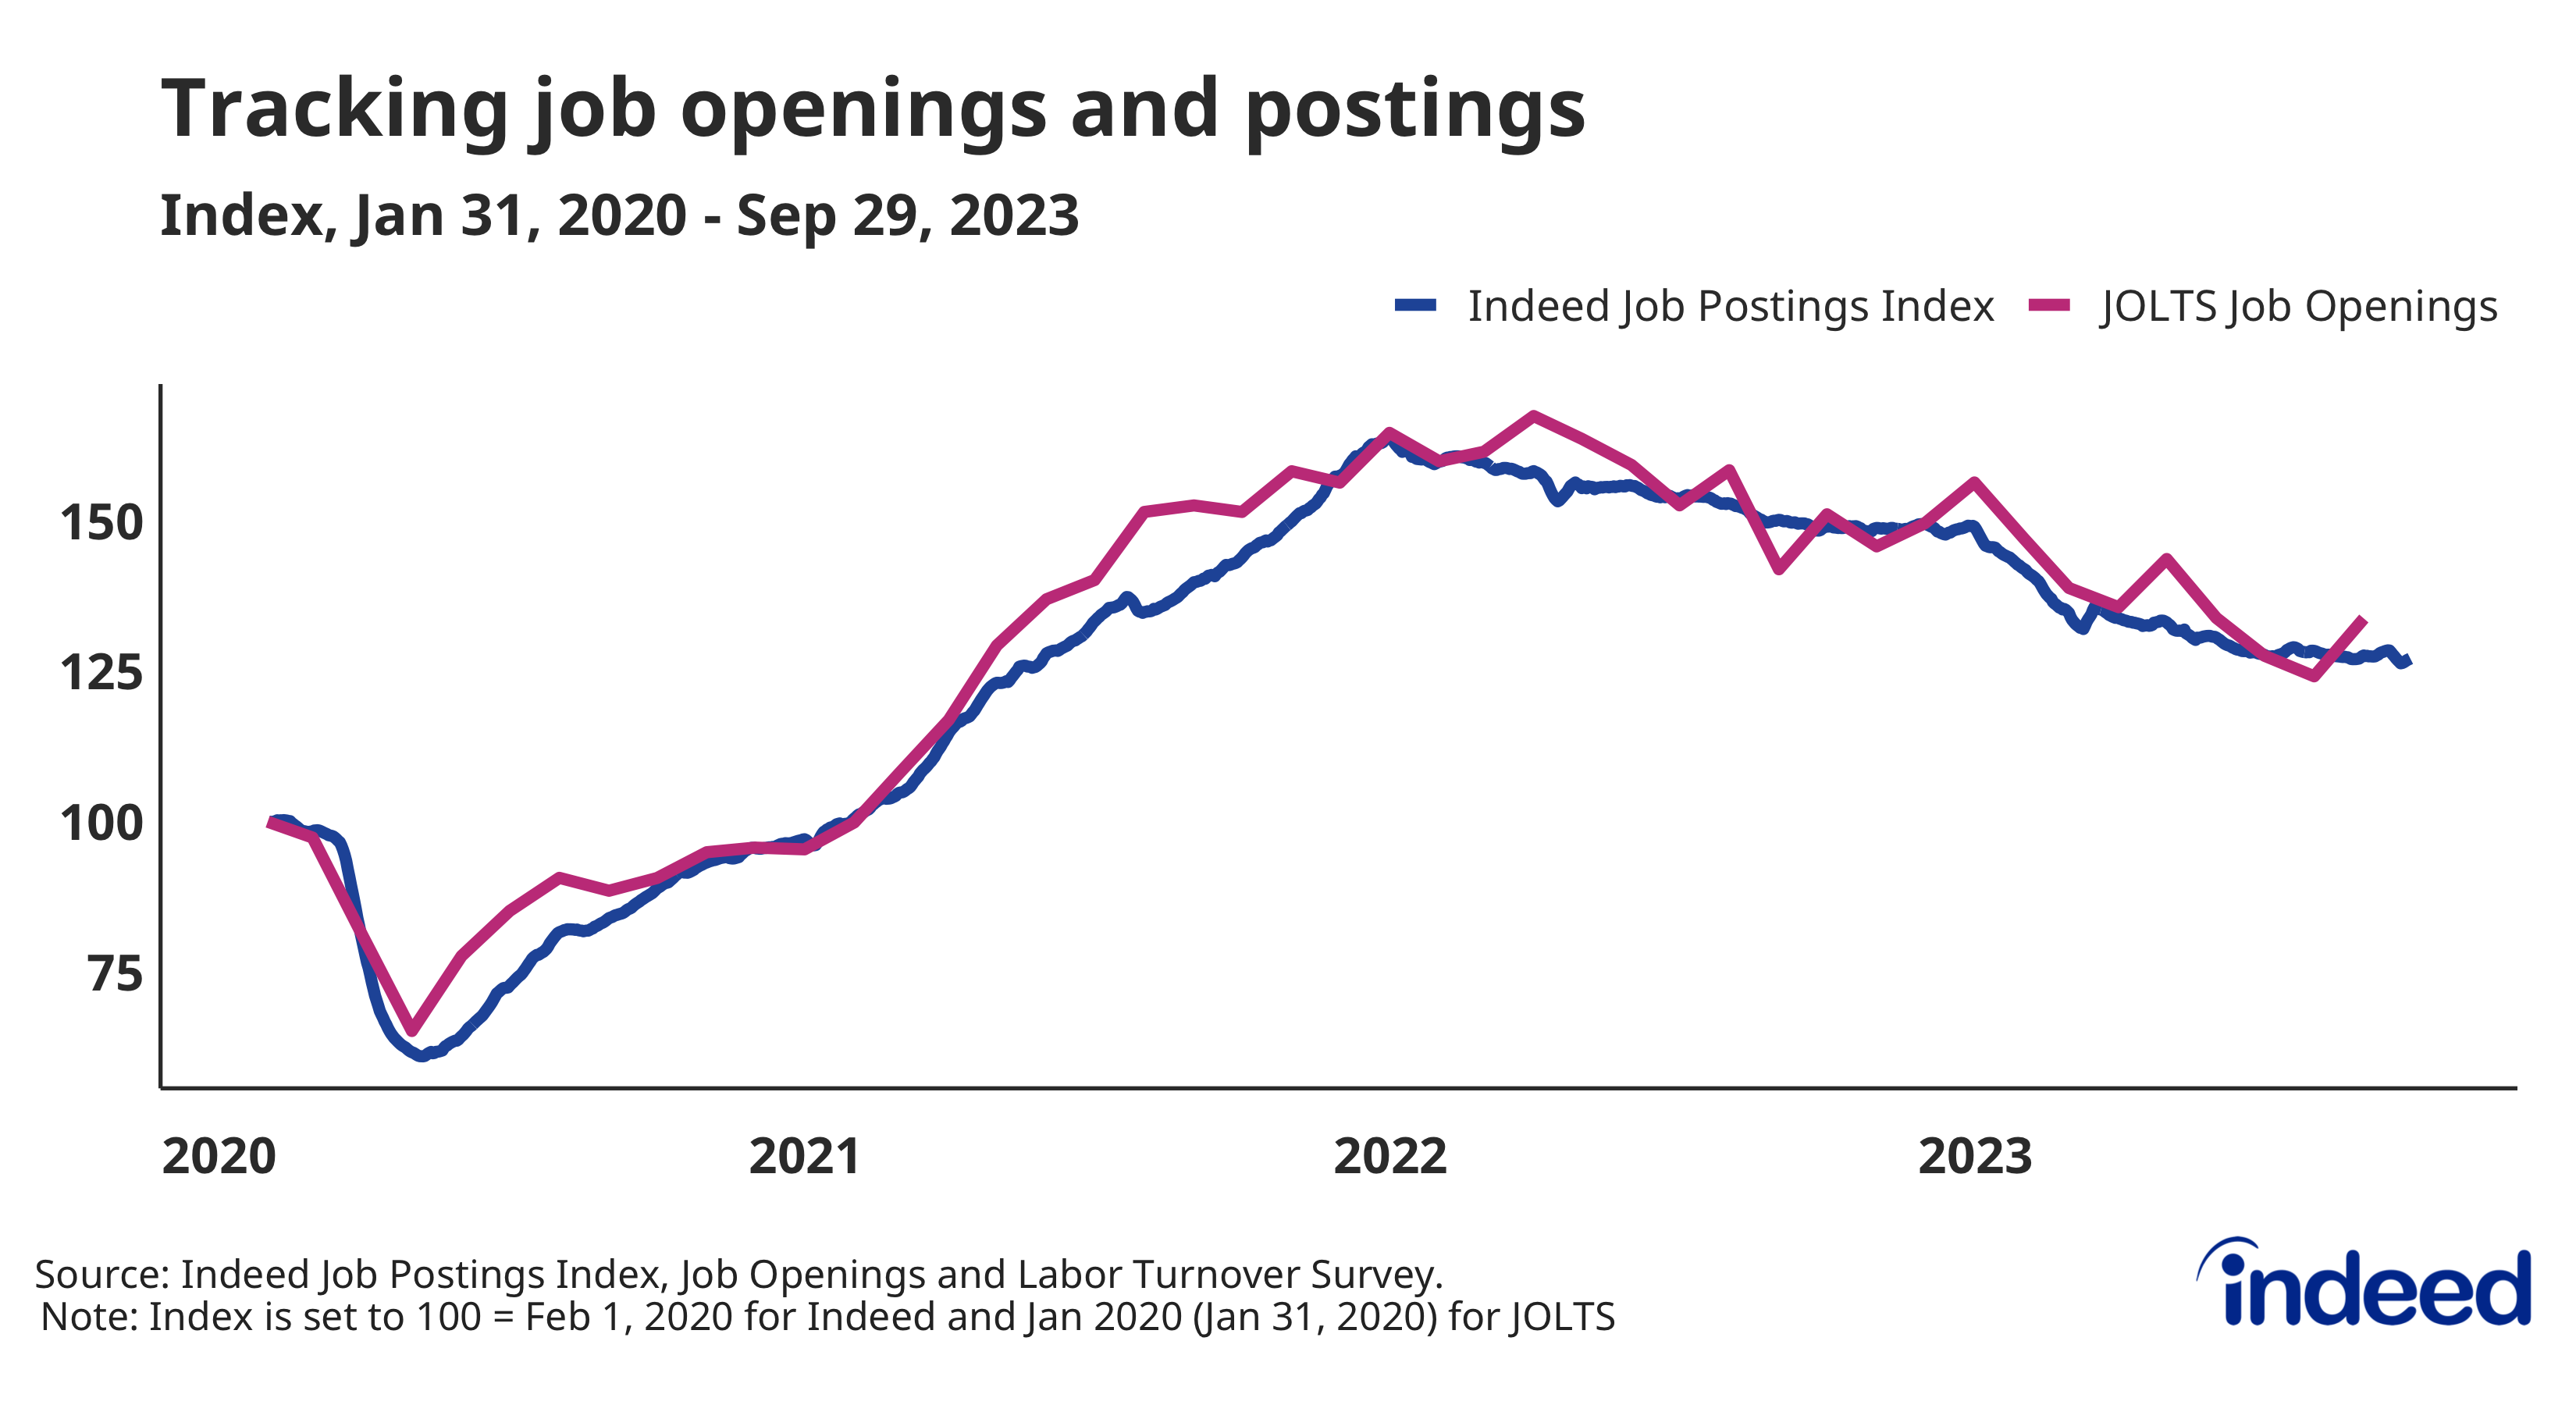 A line graph titled “Tracking job openings and postings” covers January 31, 2020, through September 29, 2023. The graph shows data on job postings from the Indeed Job Postings Index and data on job openings from the Job Openings and Labor Turnover Survey. The two data series track each other on a longer time frame with some occasional short-term deviations.